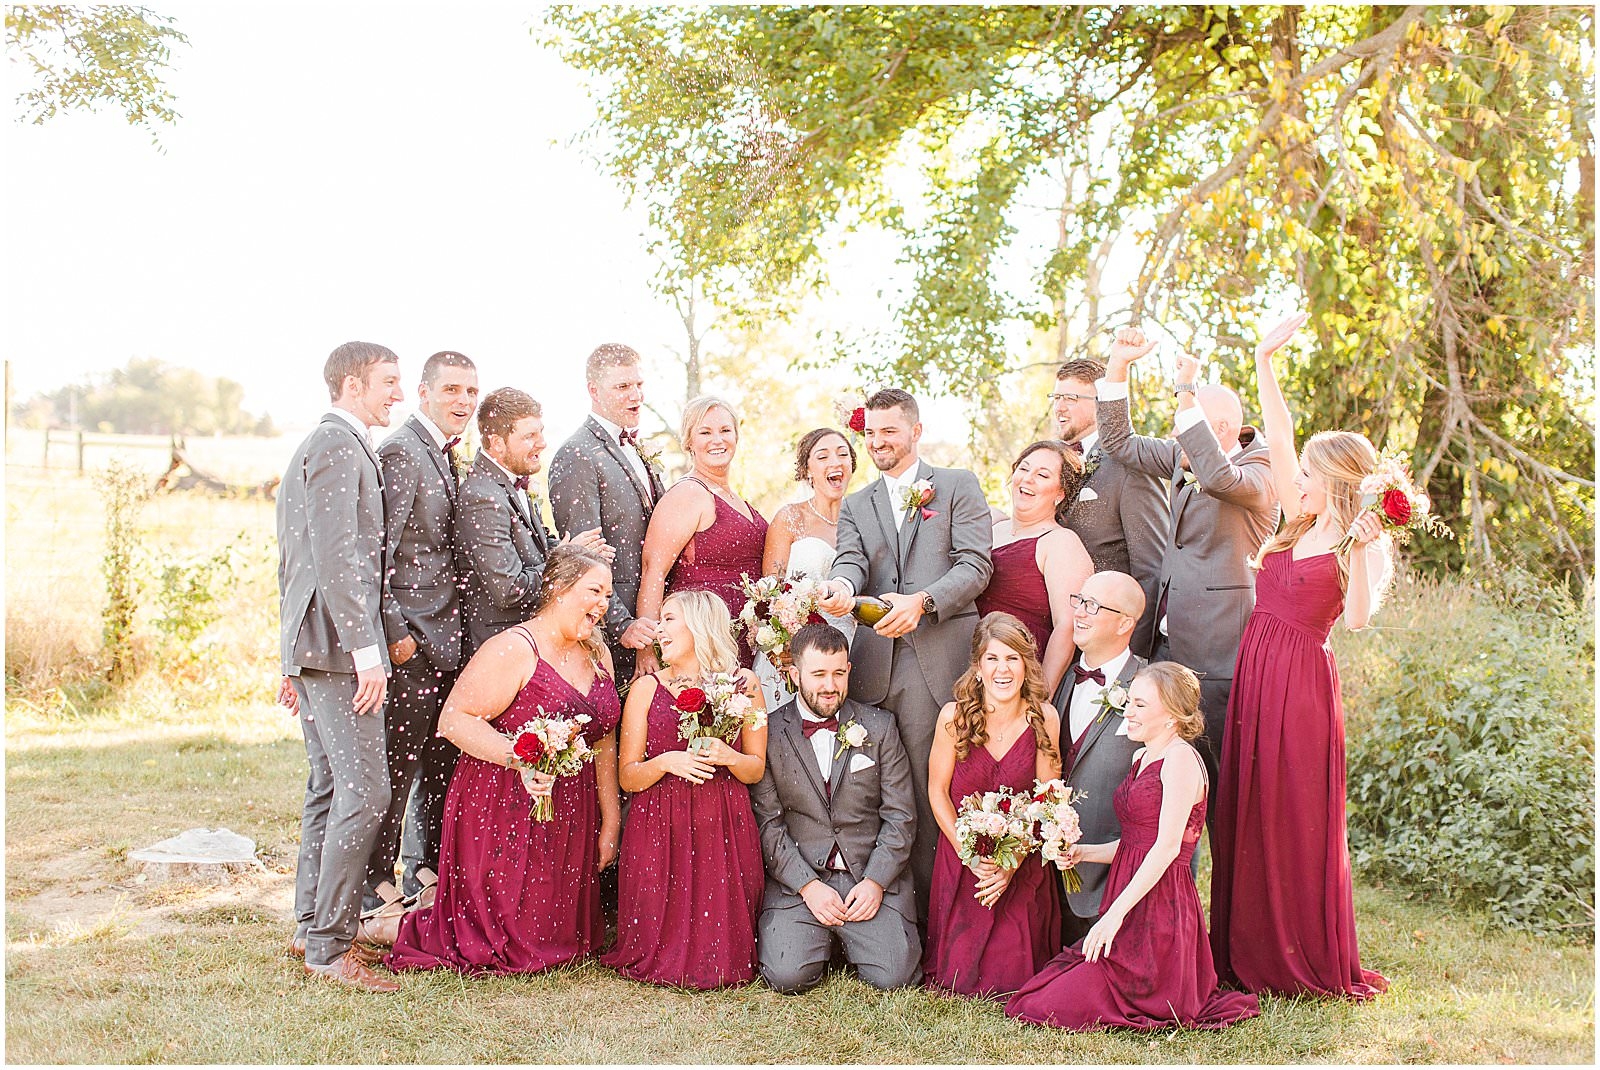 A Stunning Fall Wedding in Indianapolis, IN |. Sally and Andrew | Bret and Brandie Photography 0135.jpg